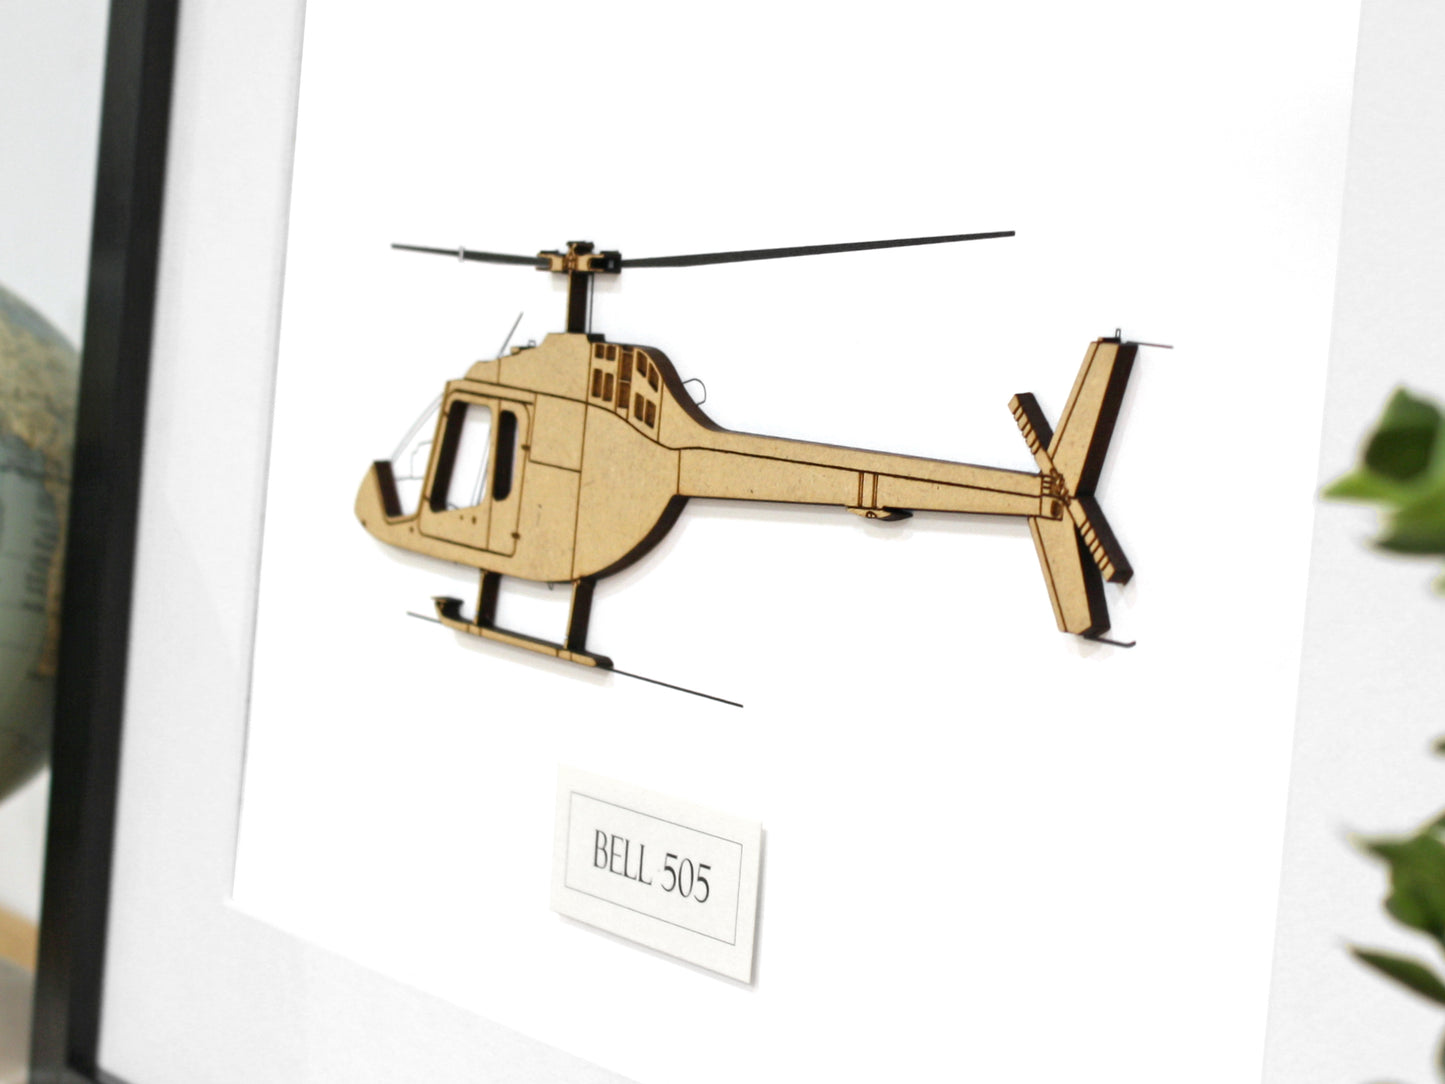 Bell 505 Jet Ranger X helicopter gifts